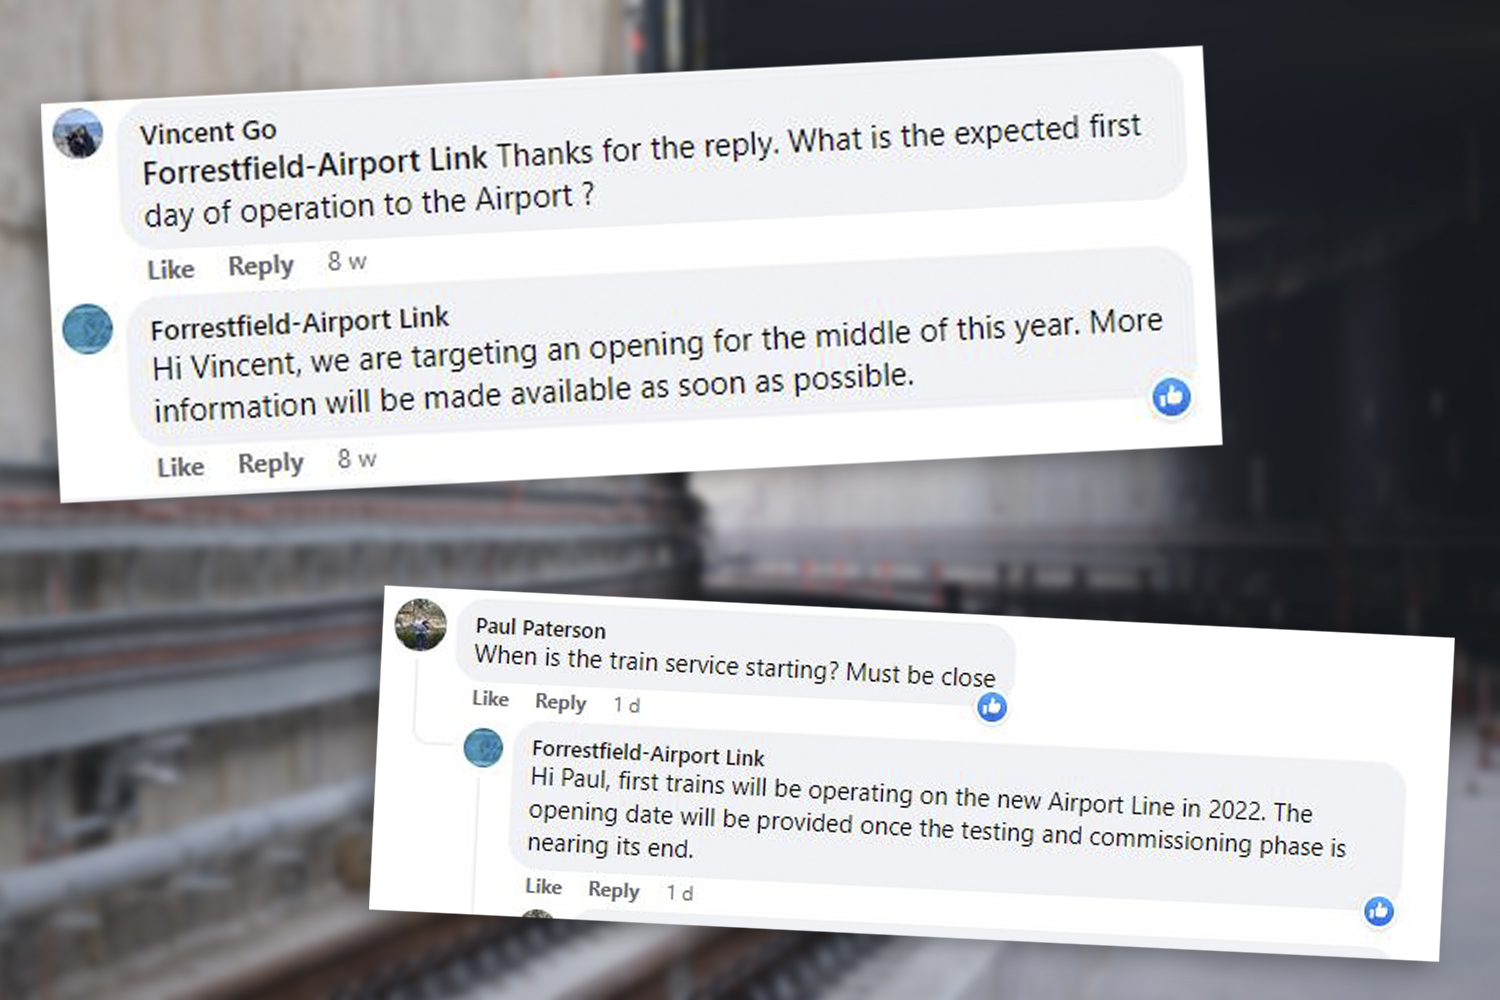 A graphic showing replies to comments on the Forrestfield-Airport Link Facebook page.